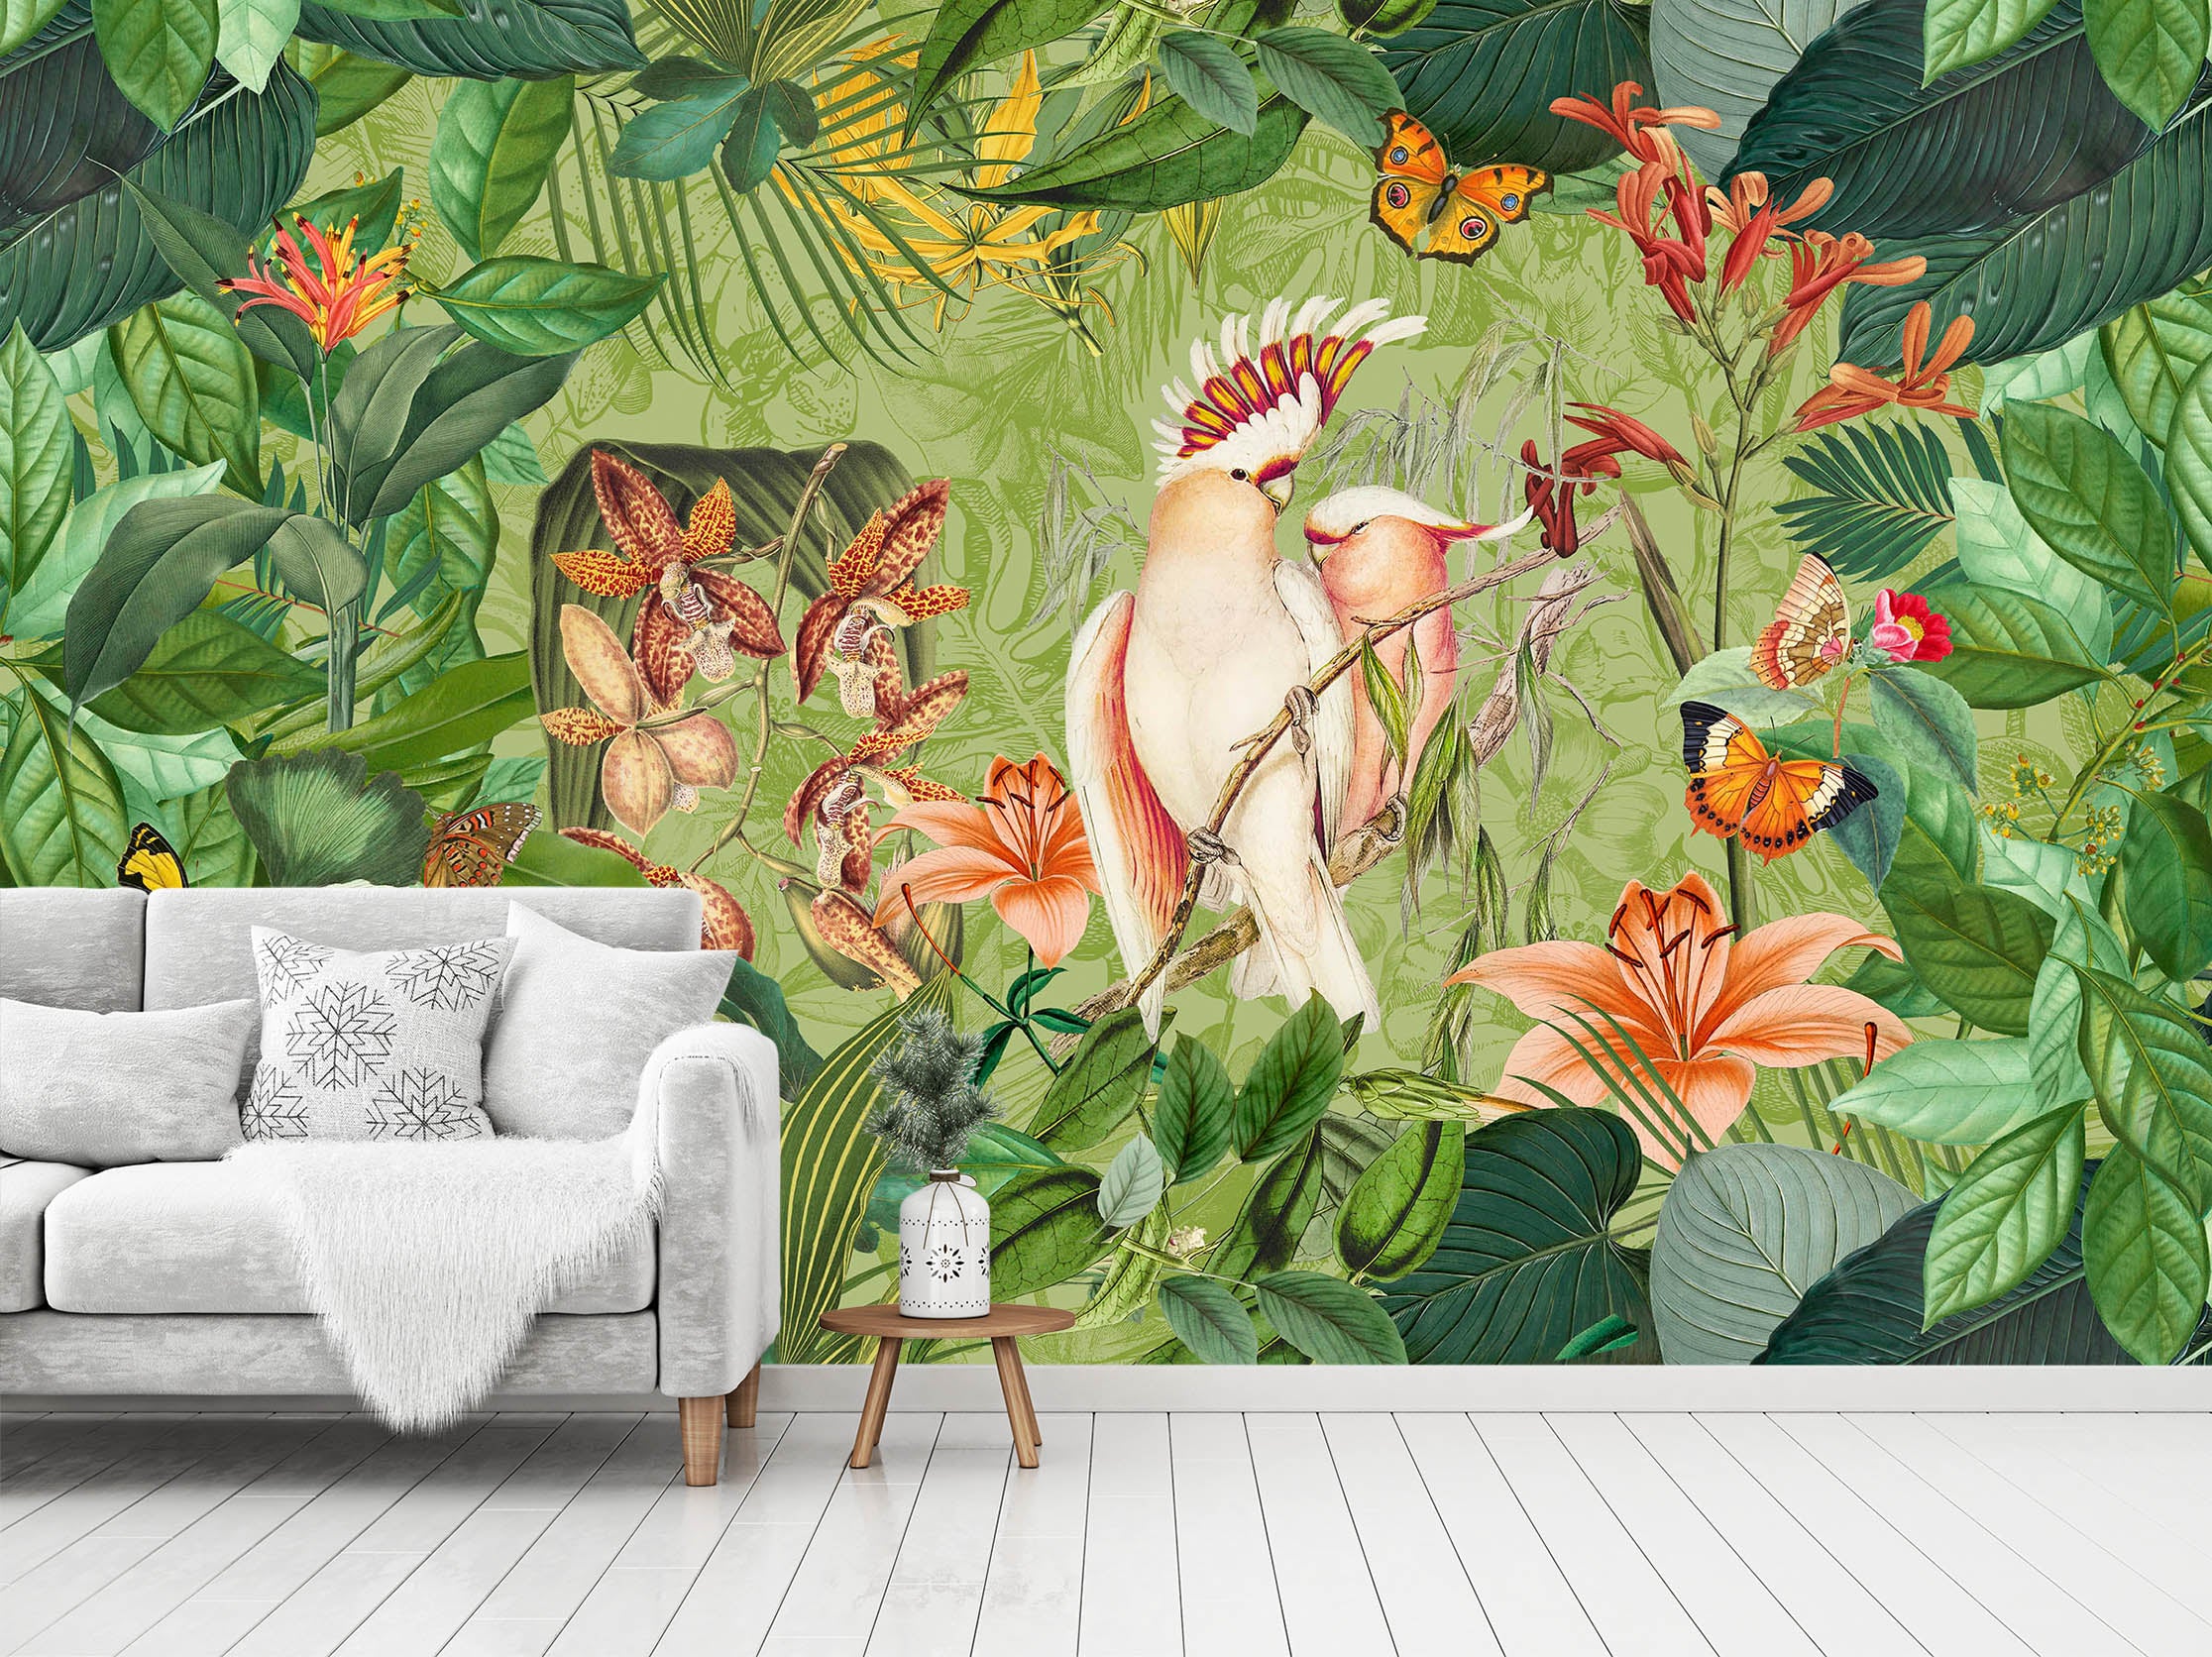 3D Cockatoos And Butterflies 1406 Andrea haase Wall Mural Wall Murals